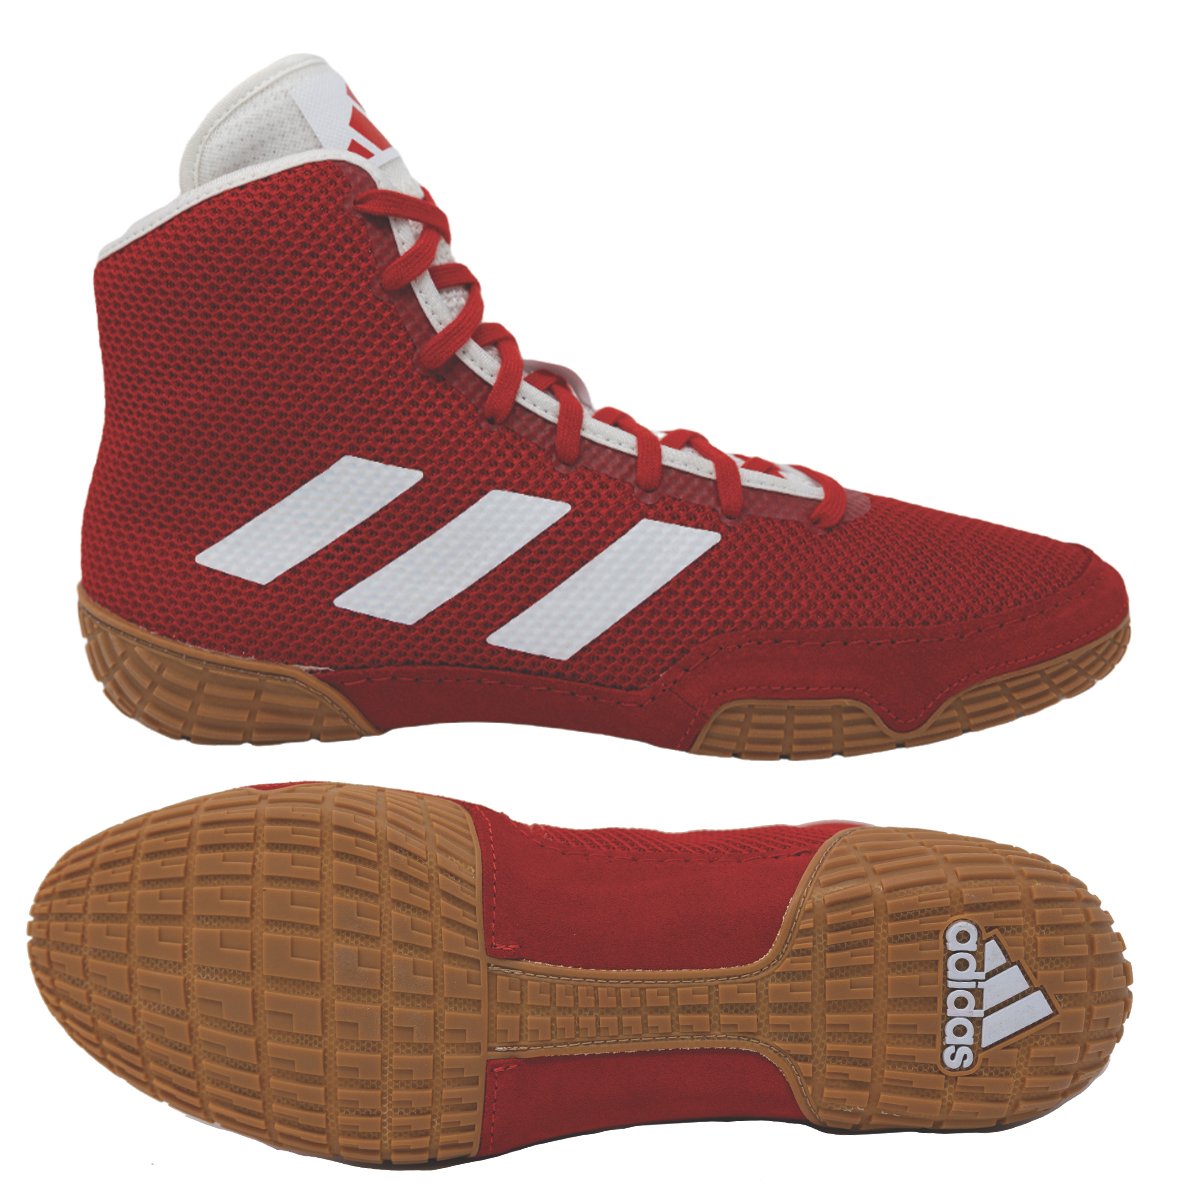 NEW - adidas Tech Fall 2.0 Wrestling Shoe, color: Red/White - Click Image to Close